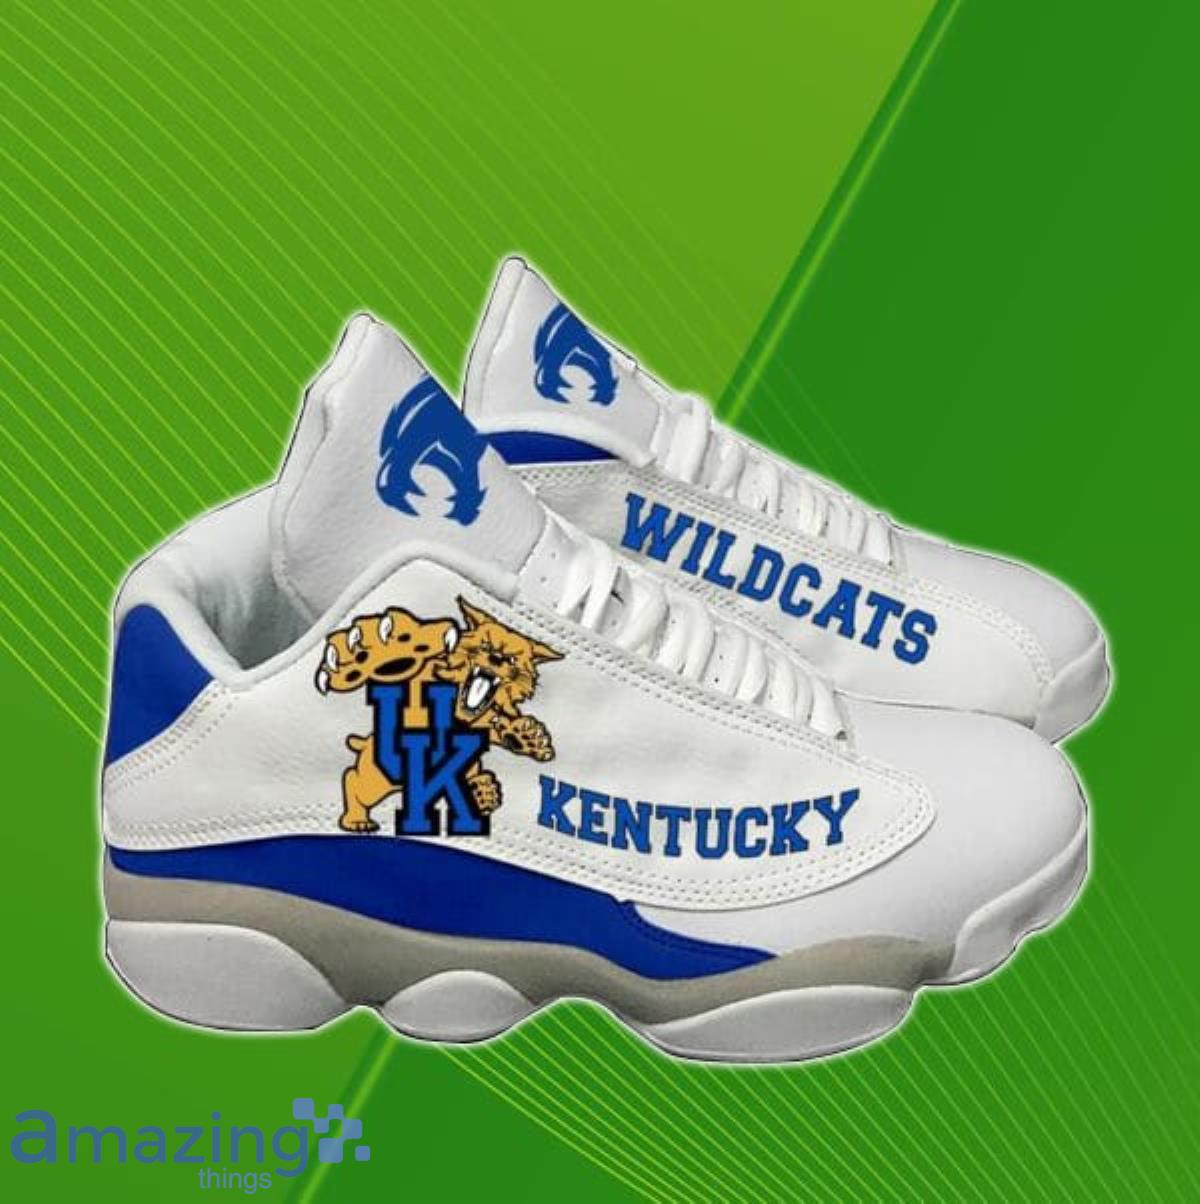 Kentucky Wildcats Form Air Jordan 13 Sneakers Personalized Shoes Design Product Photo 1